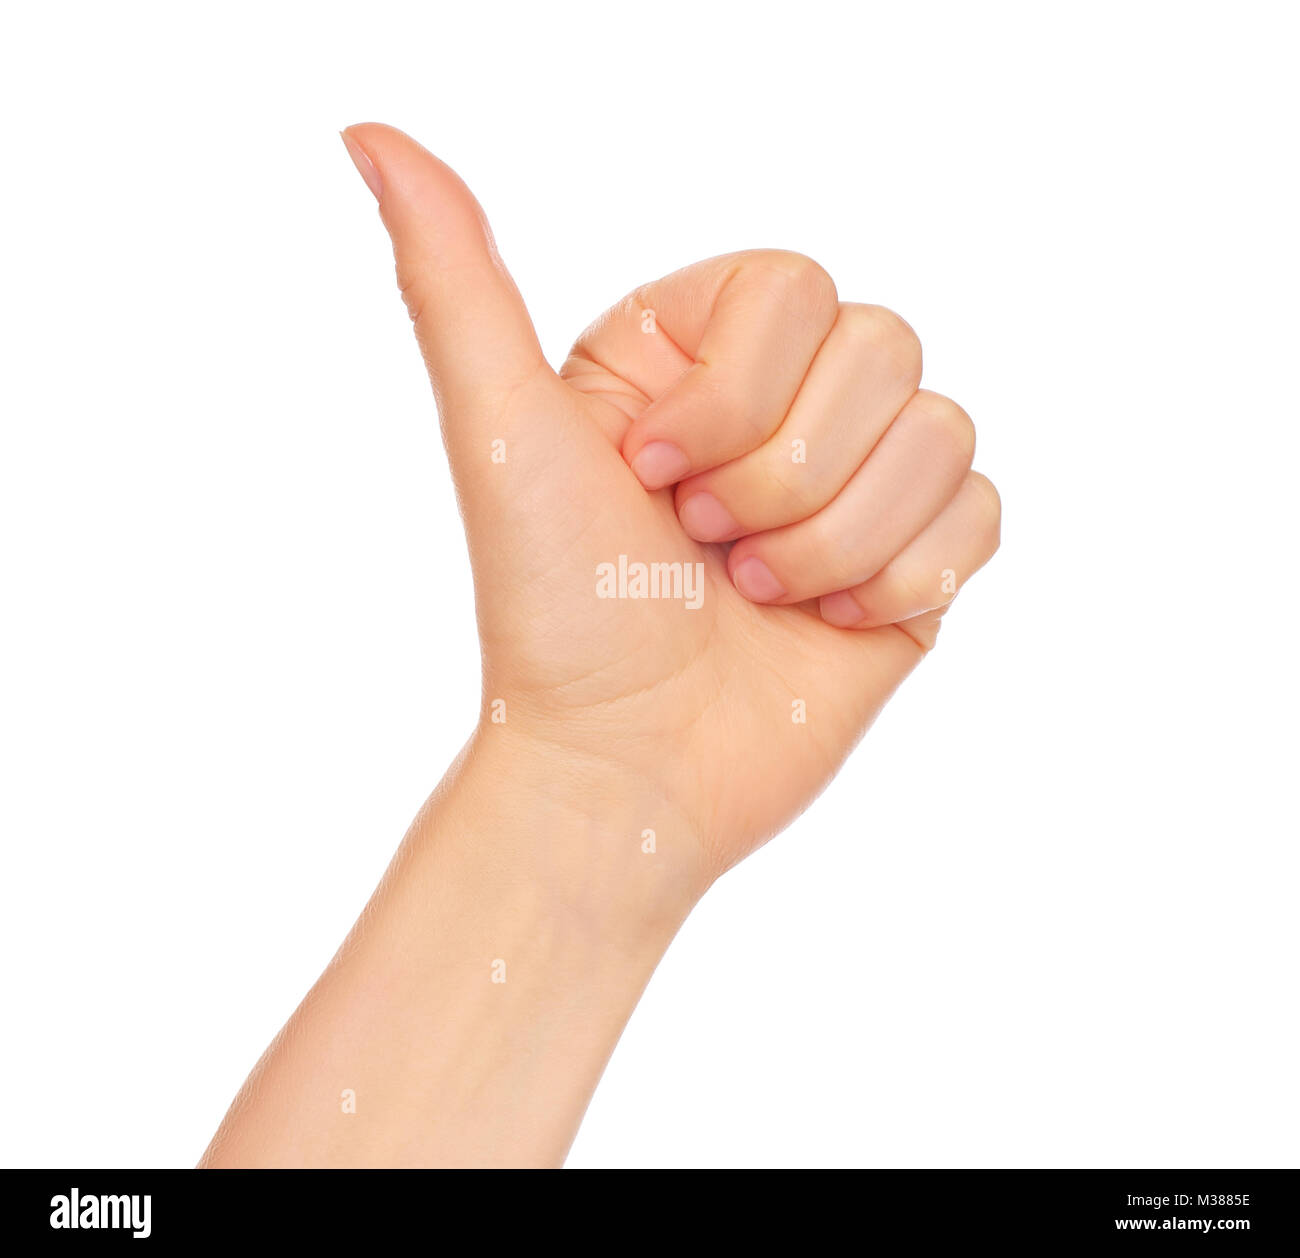 Finger sign number one Cut Out Stock Images & Pictures - Alamy